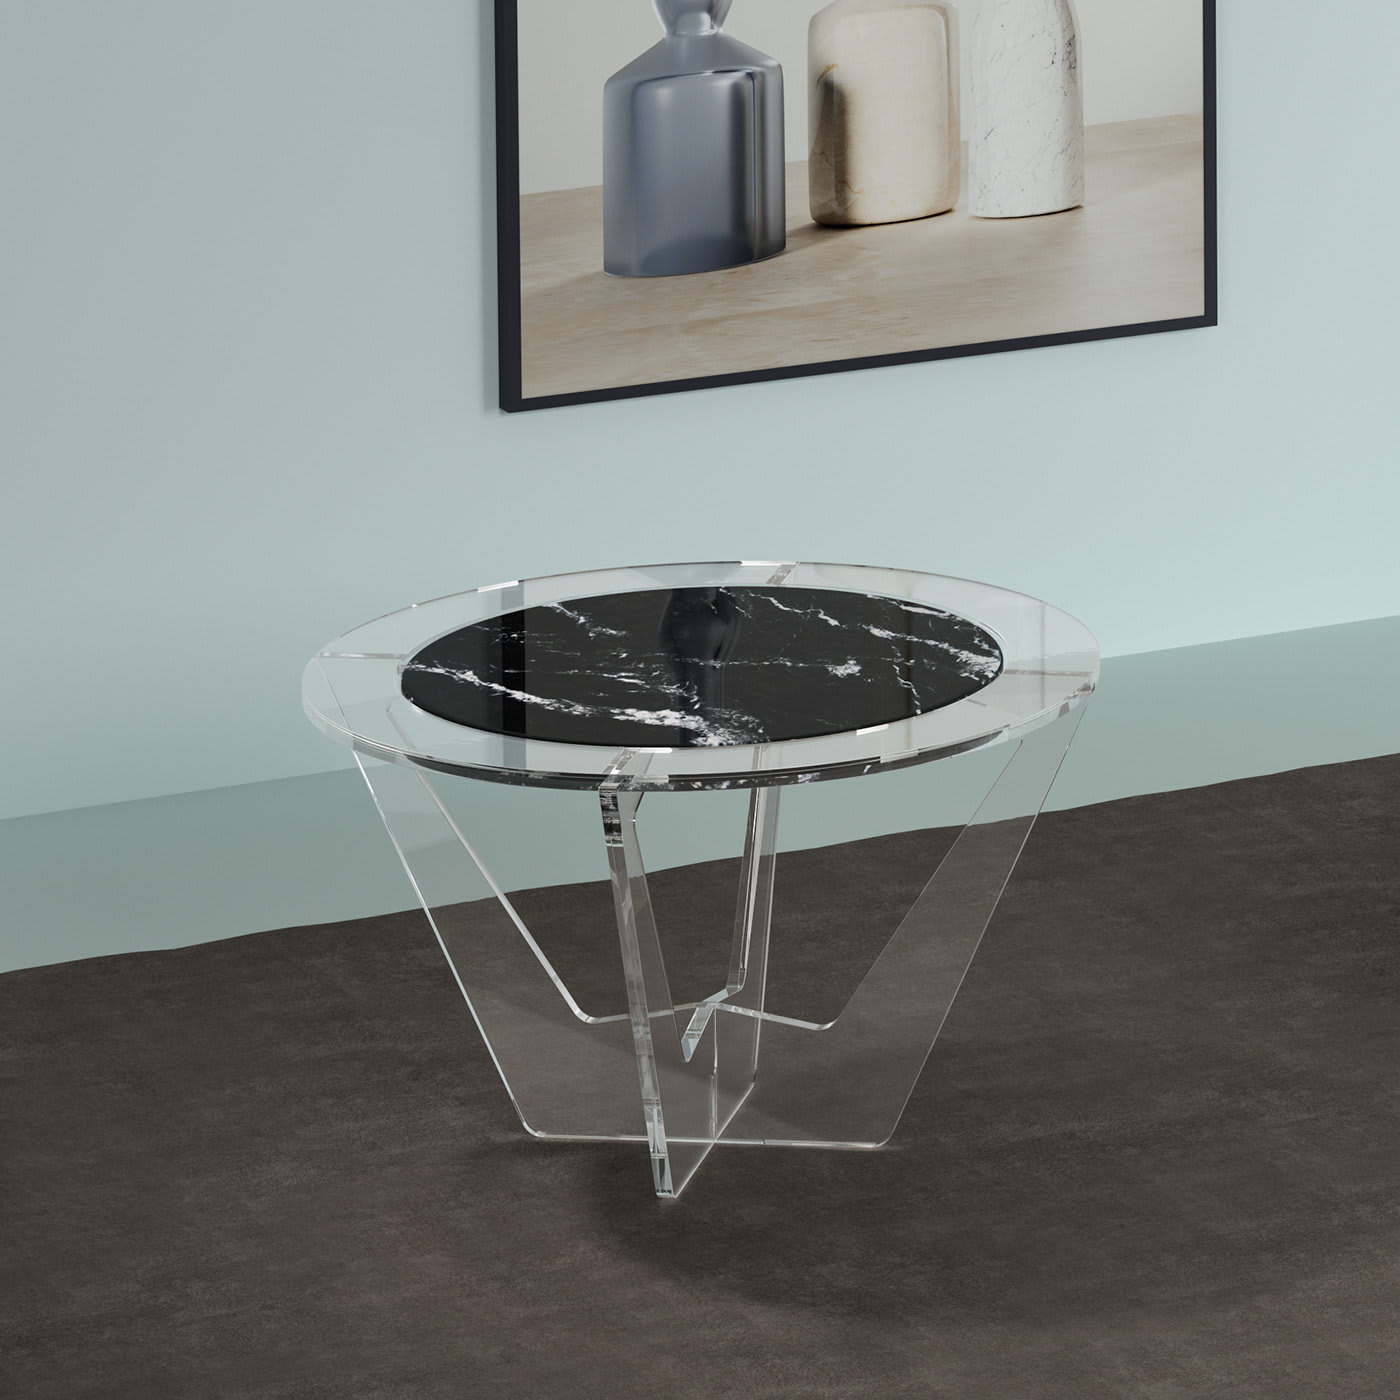 Hac Gray Round Coffee Table with Gray Carnico Marble Top - Madea Milano